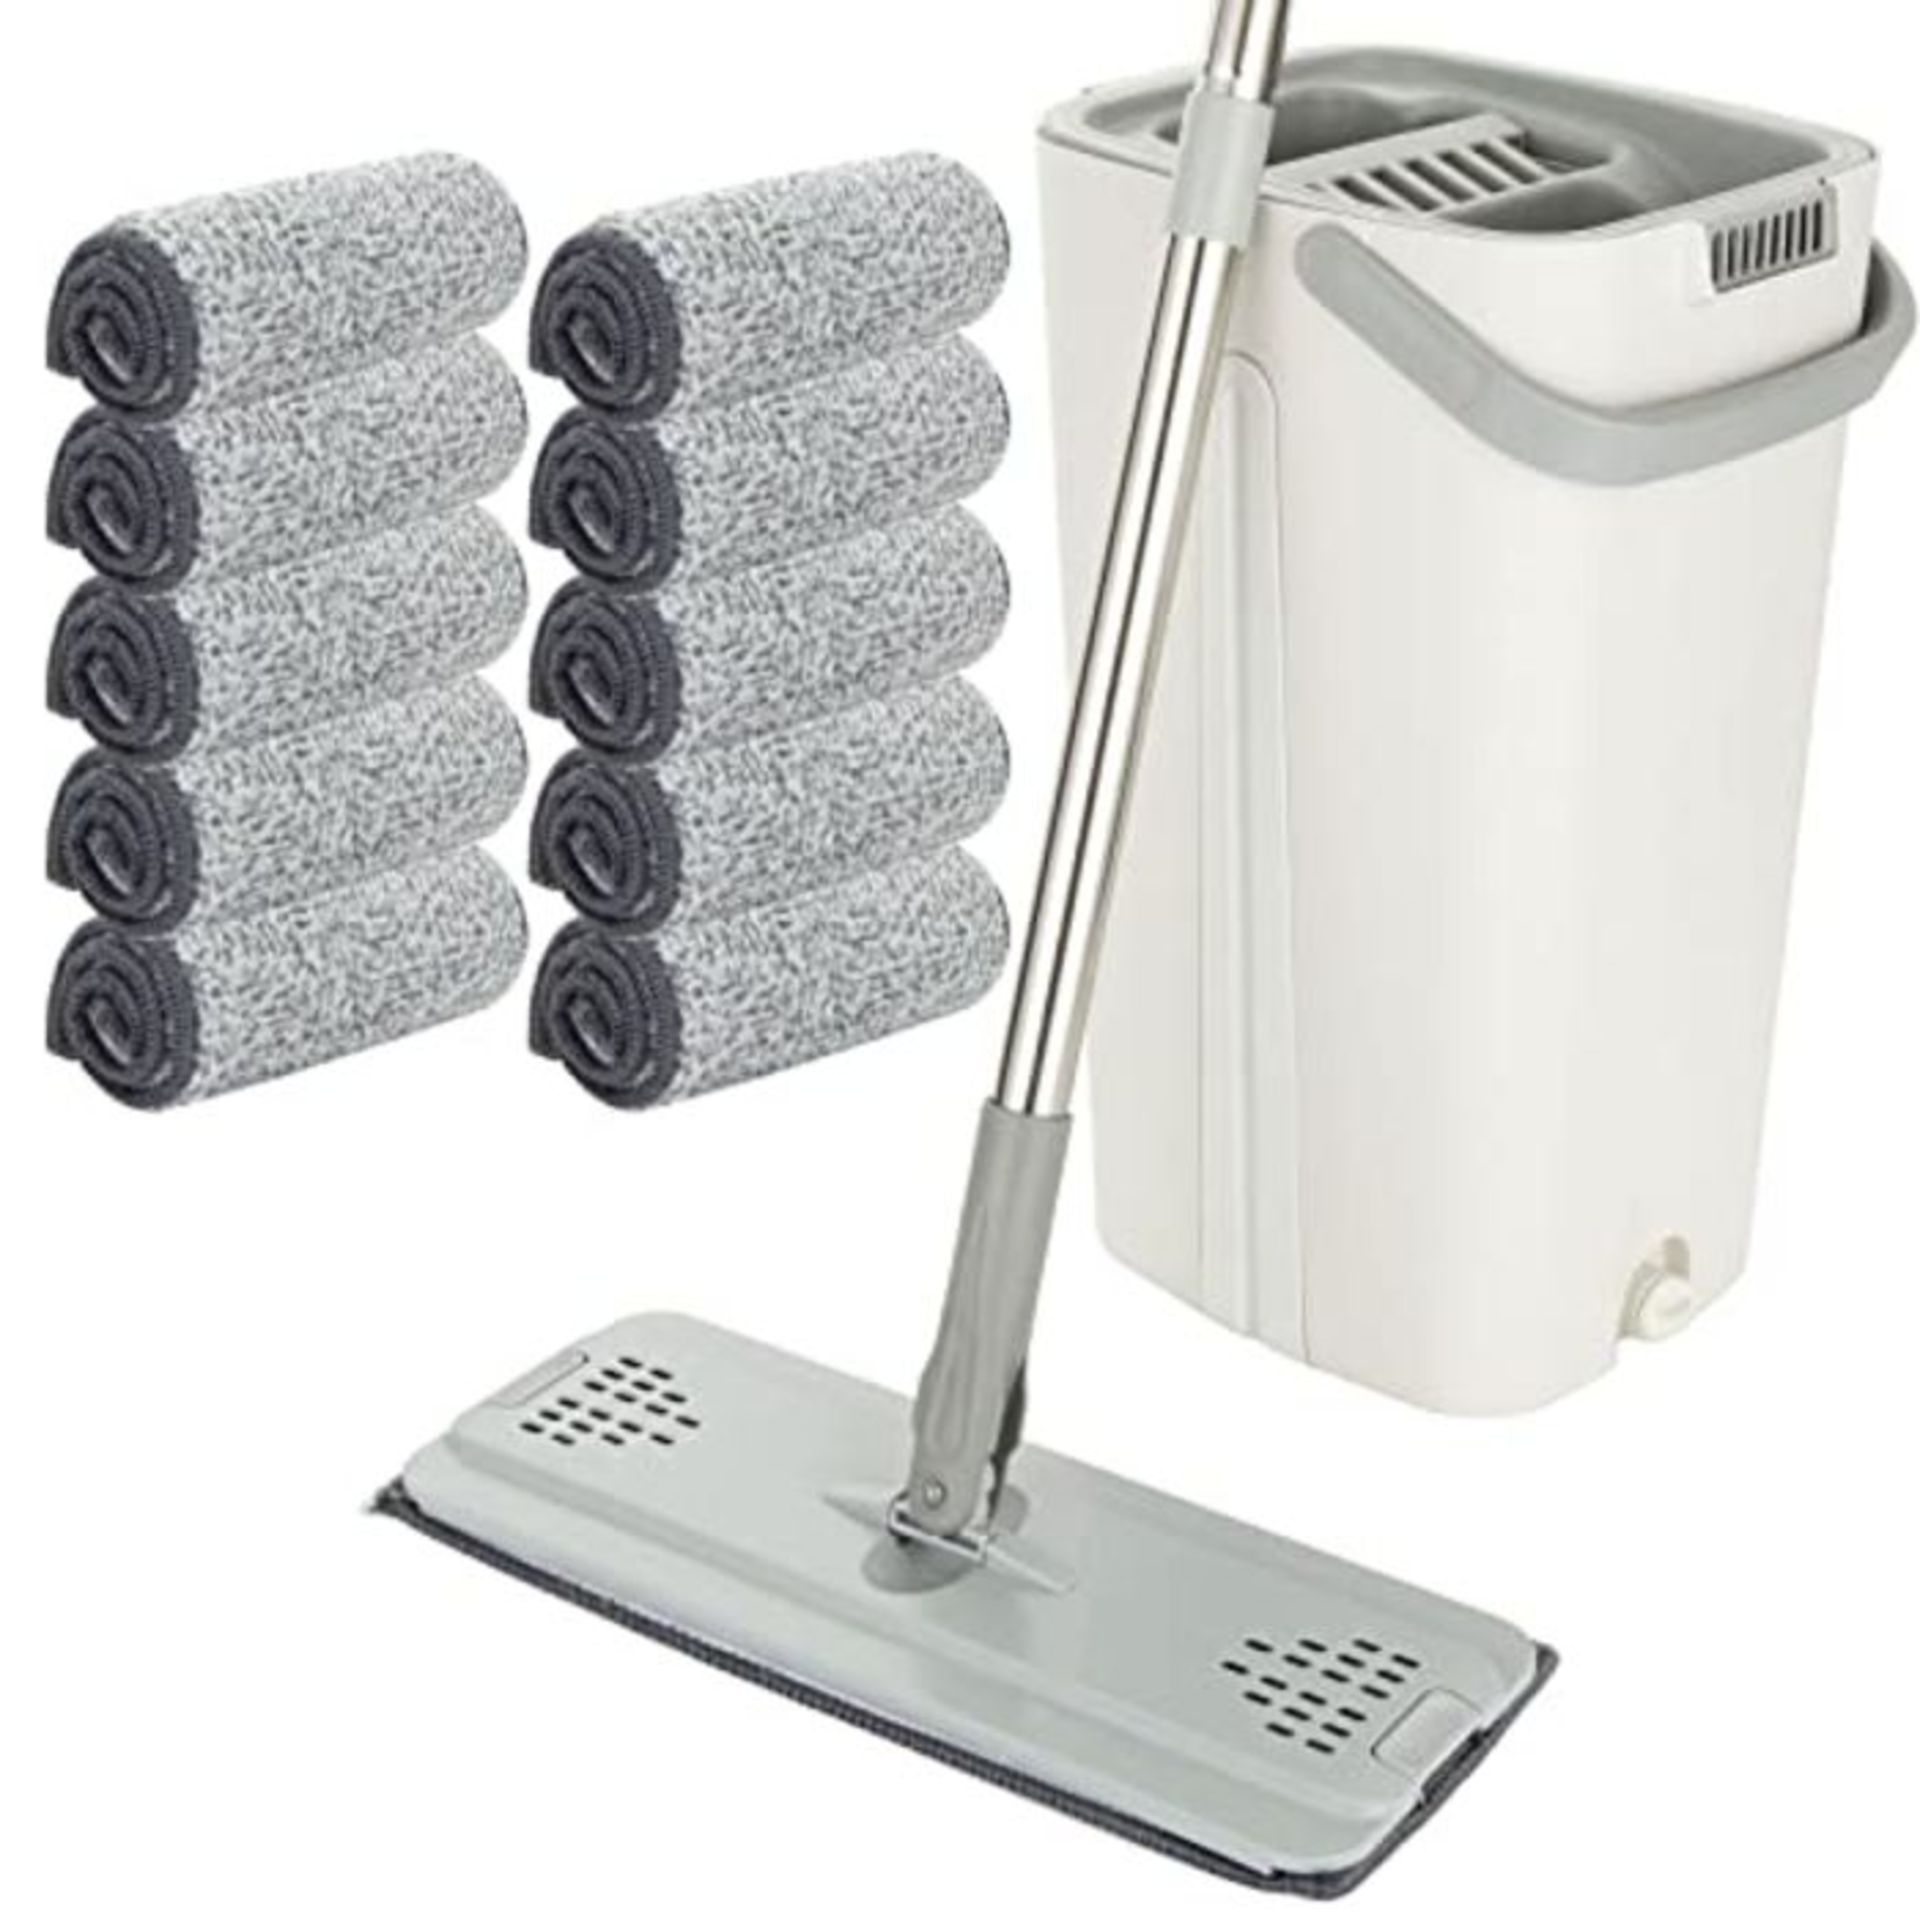 ASelected Flat Mop and Bucket set, Hands Free Squeeze Mop with 10 Reusable Microfiber - Image 4 of 6